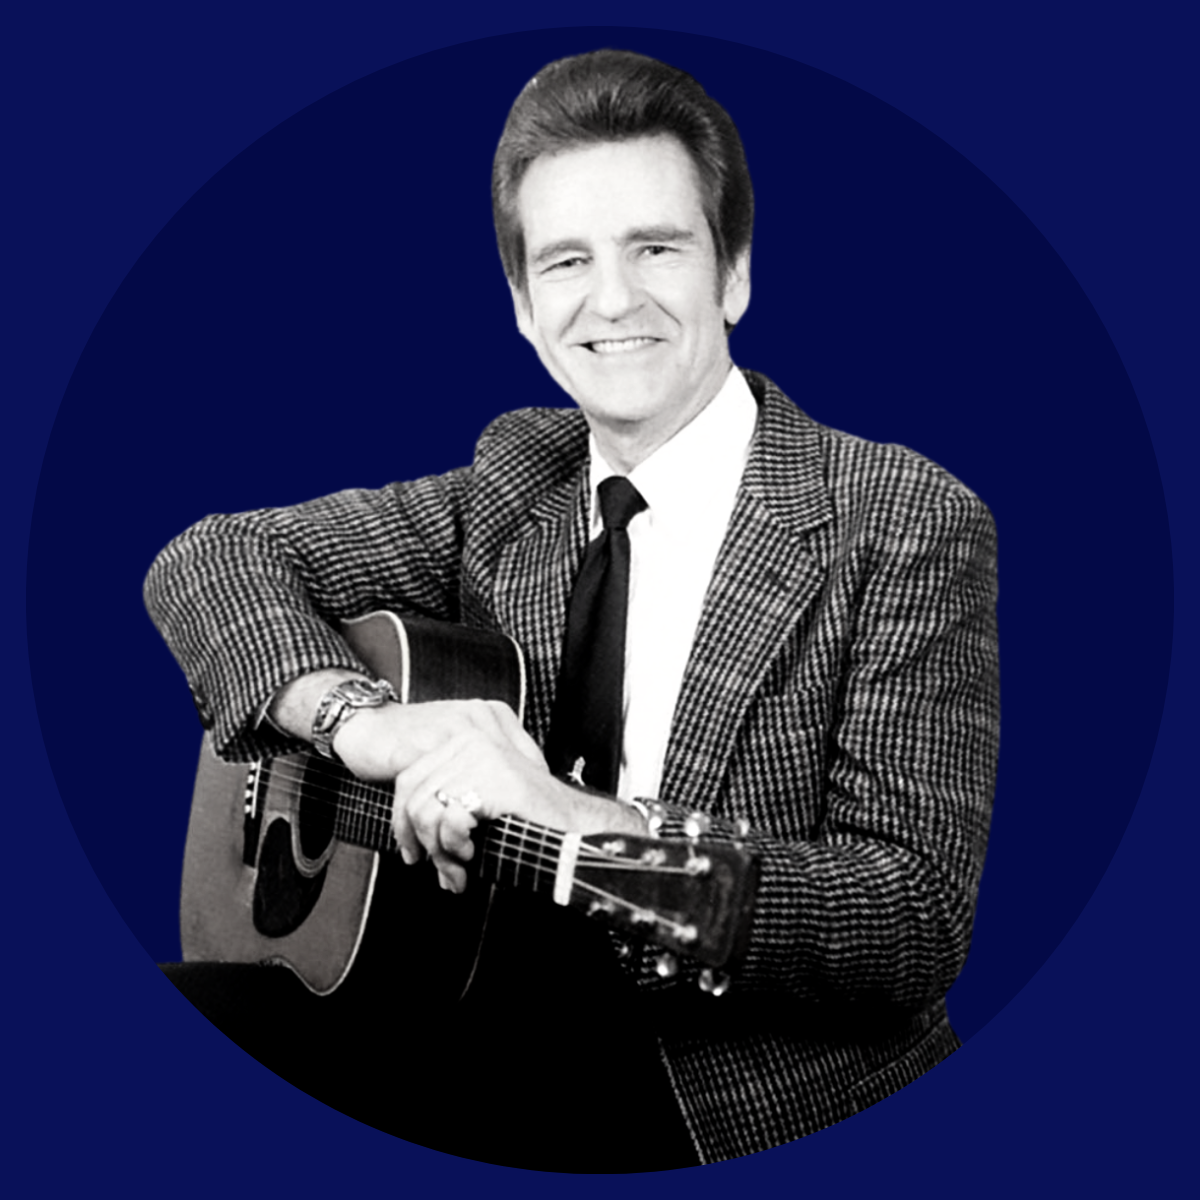 What's Del McCoury Really Like? We Asked Three People Who Know Him Best